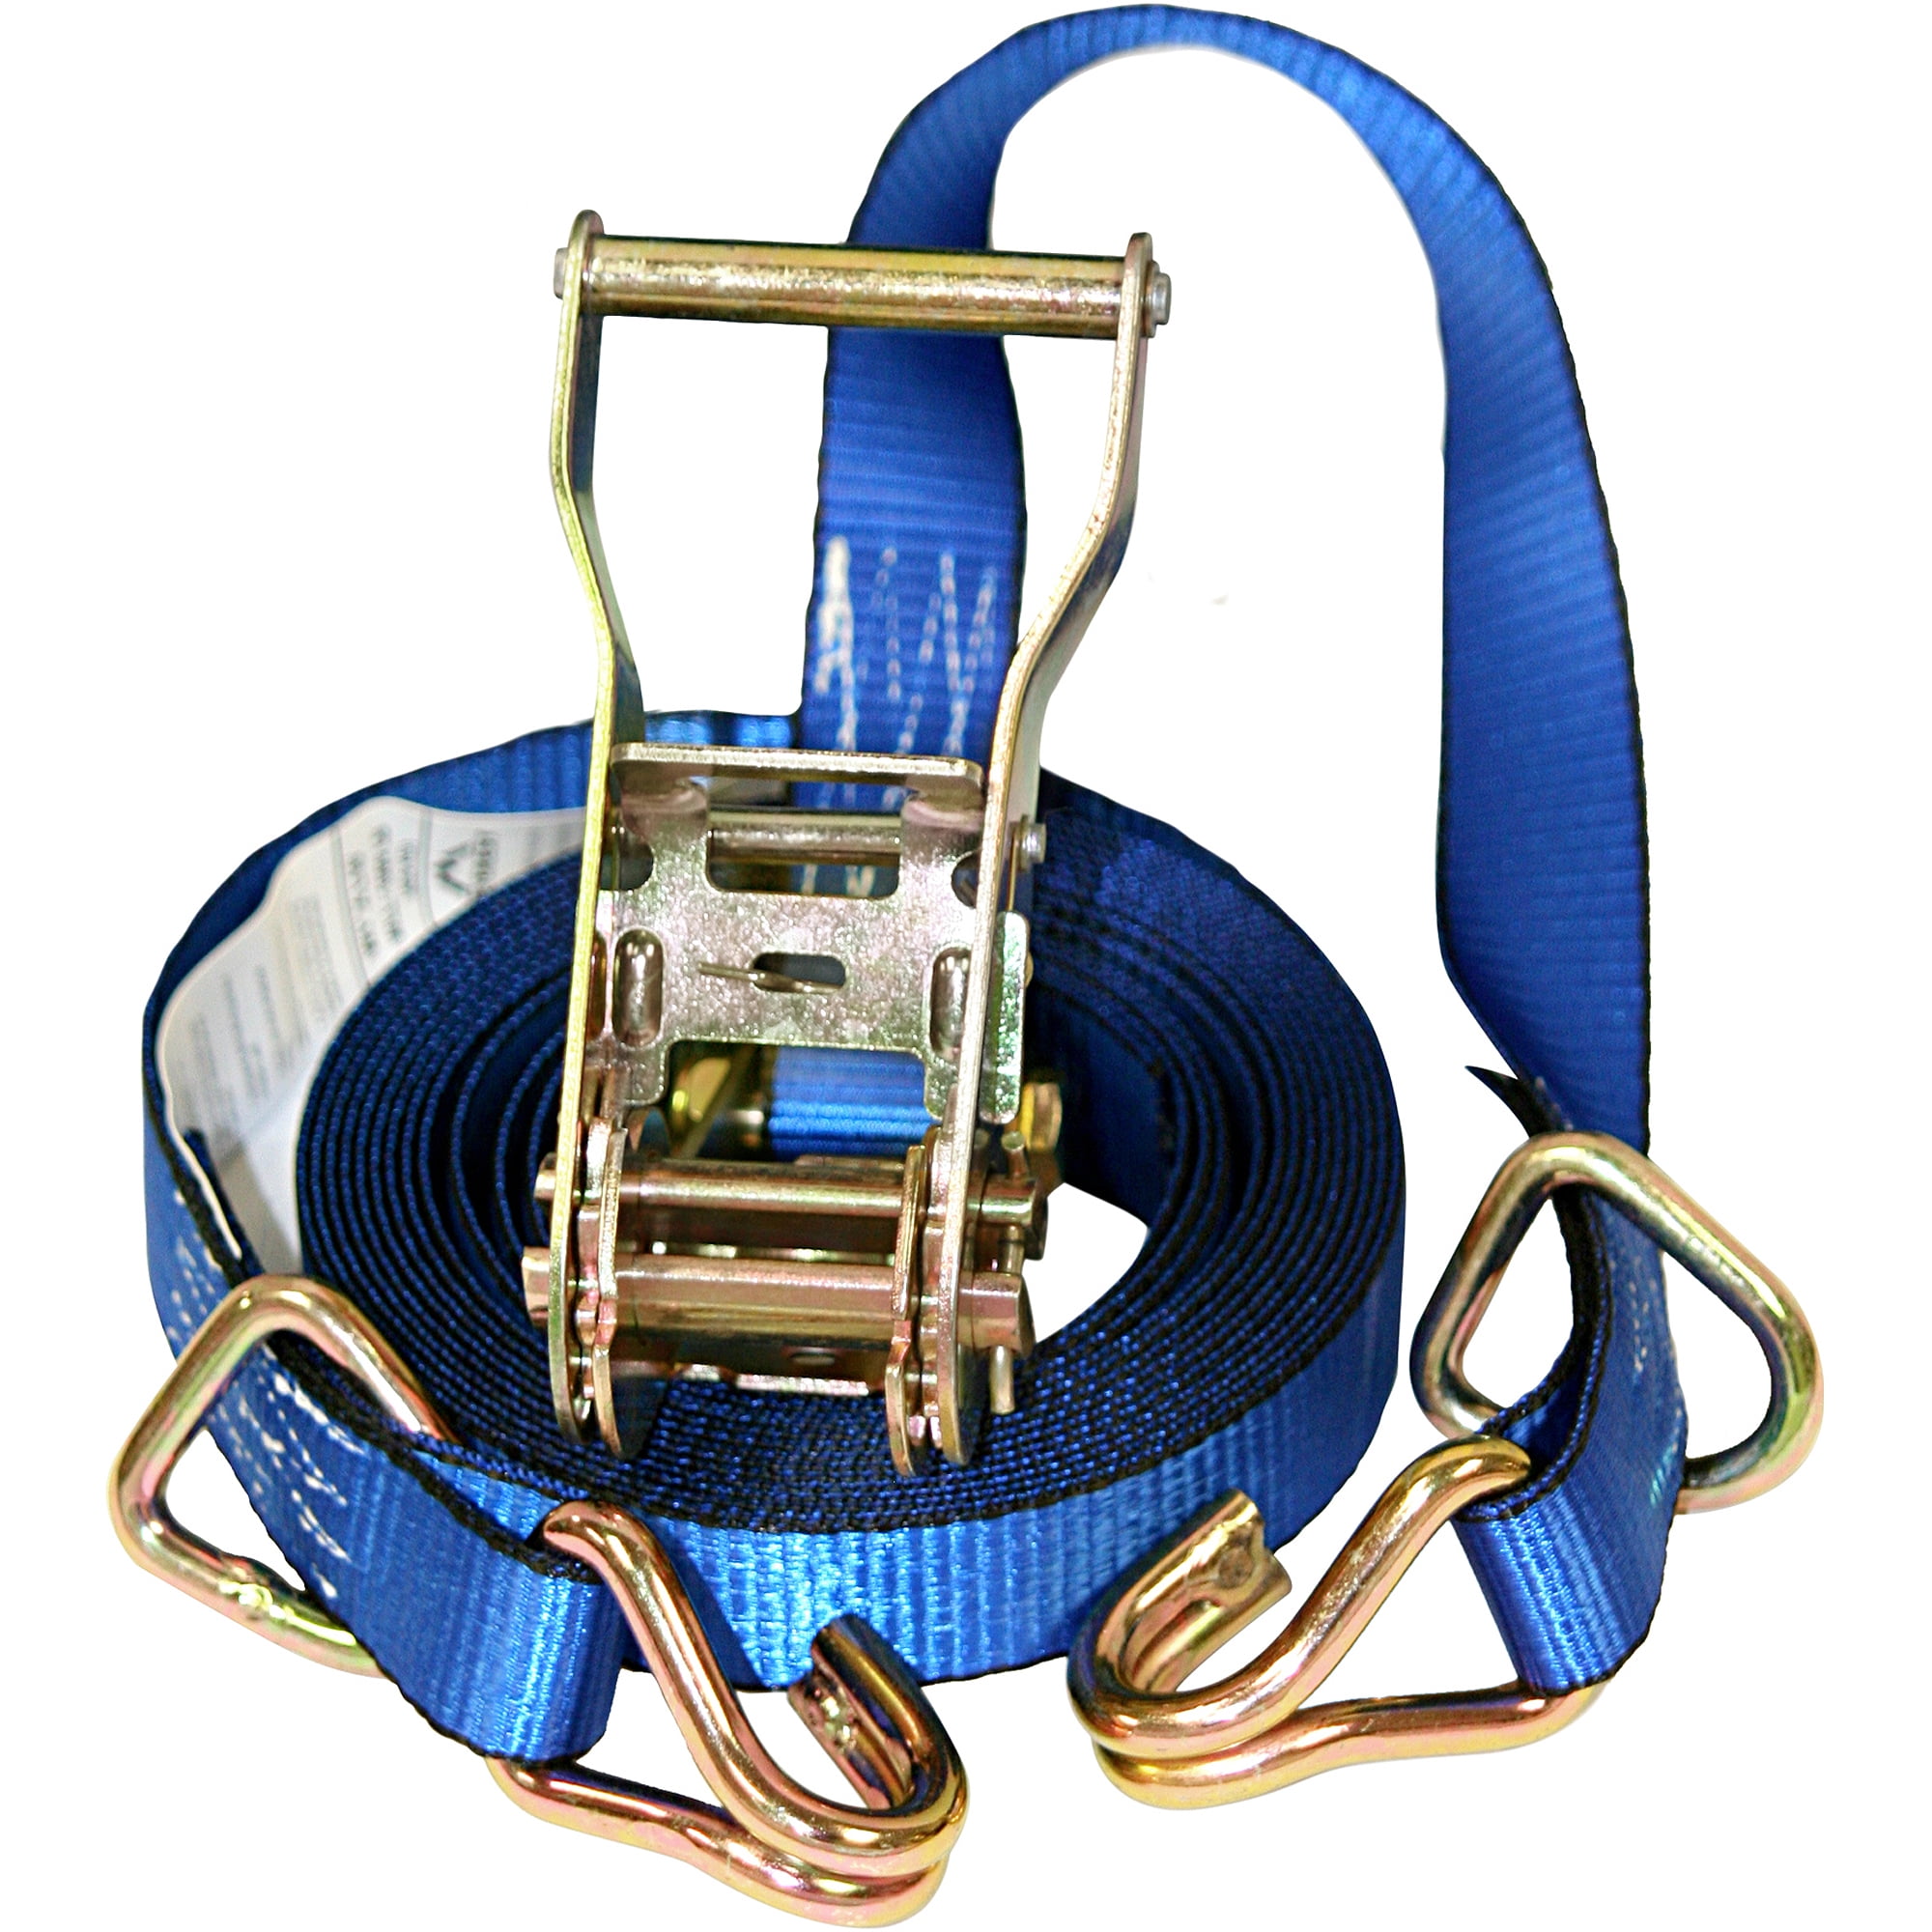 Everest S1021 Heavy Duty Tie Down Straps 2 in for sale online x 27 ft